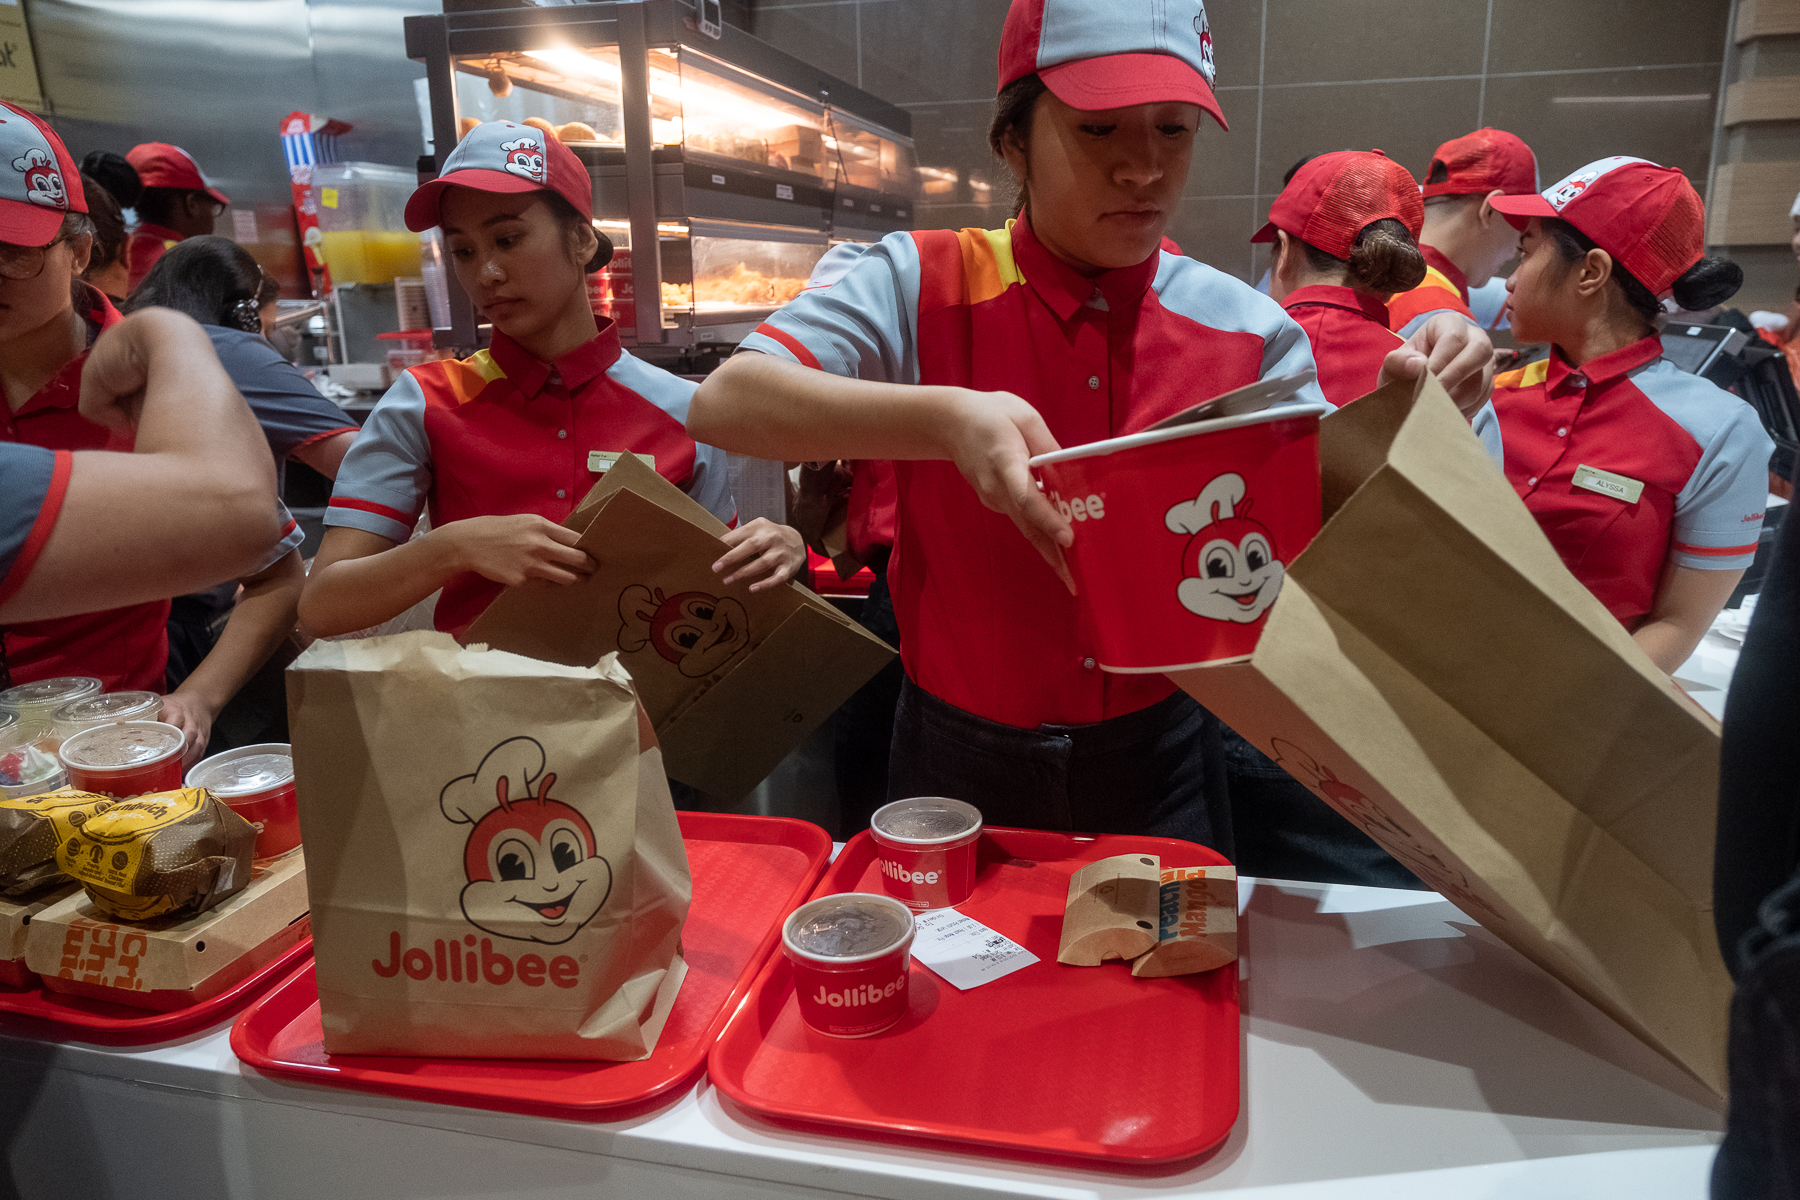 Workers package orders at a Manhattan location of Jollibee, a Filipino fast food chain.